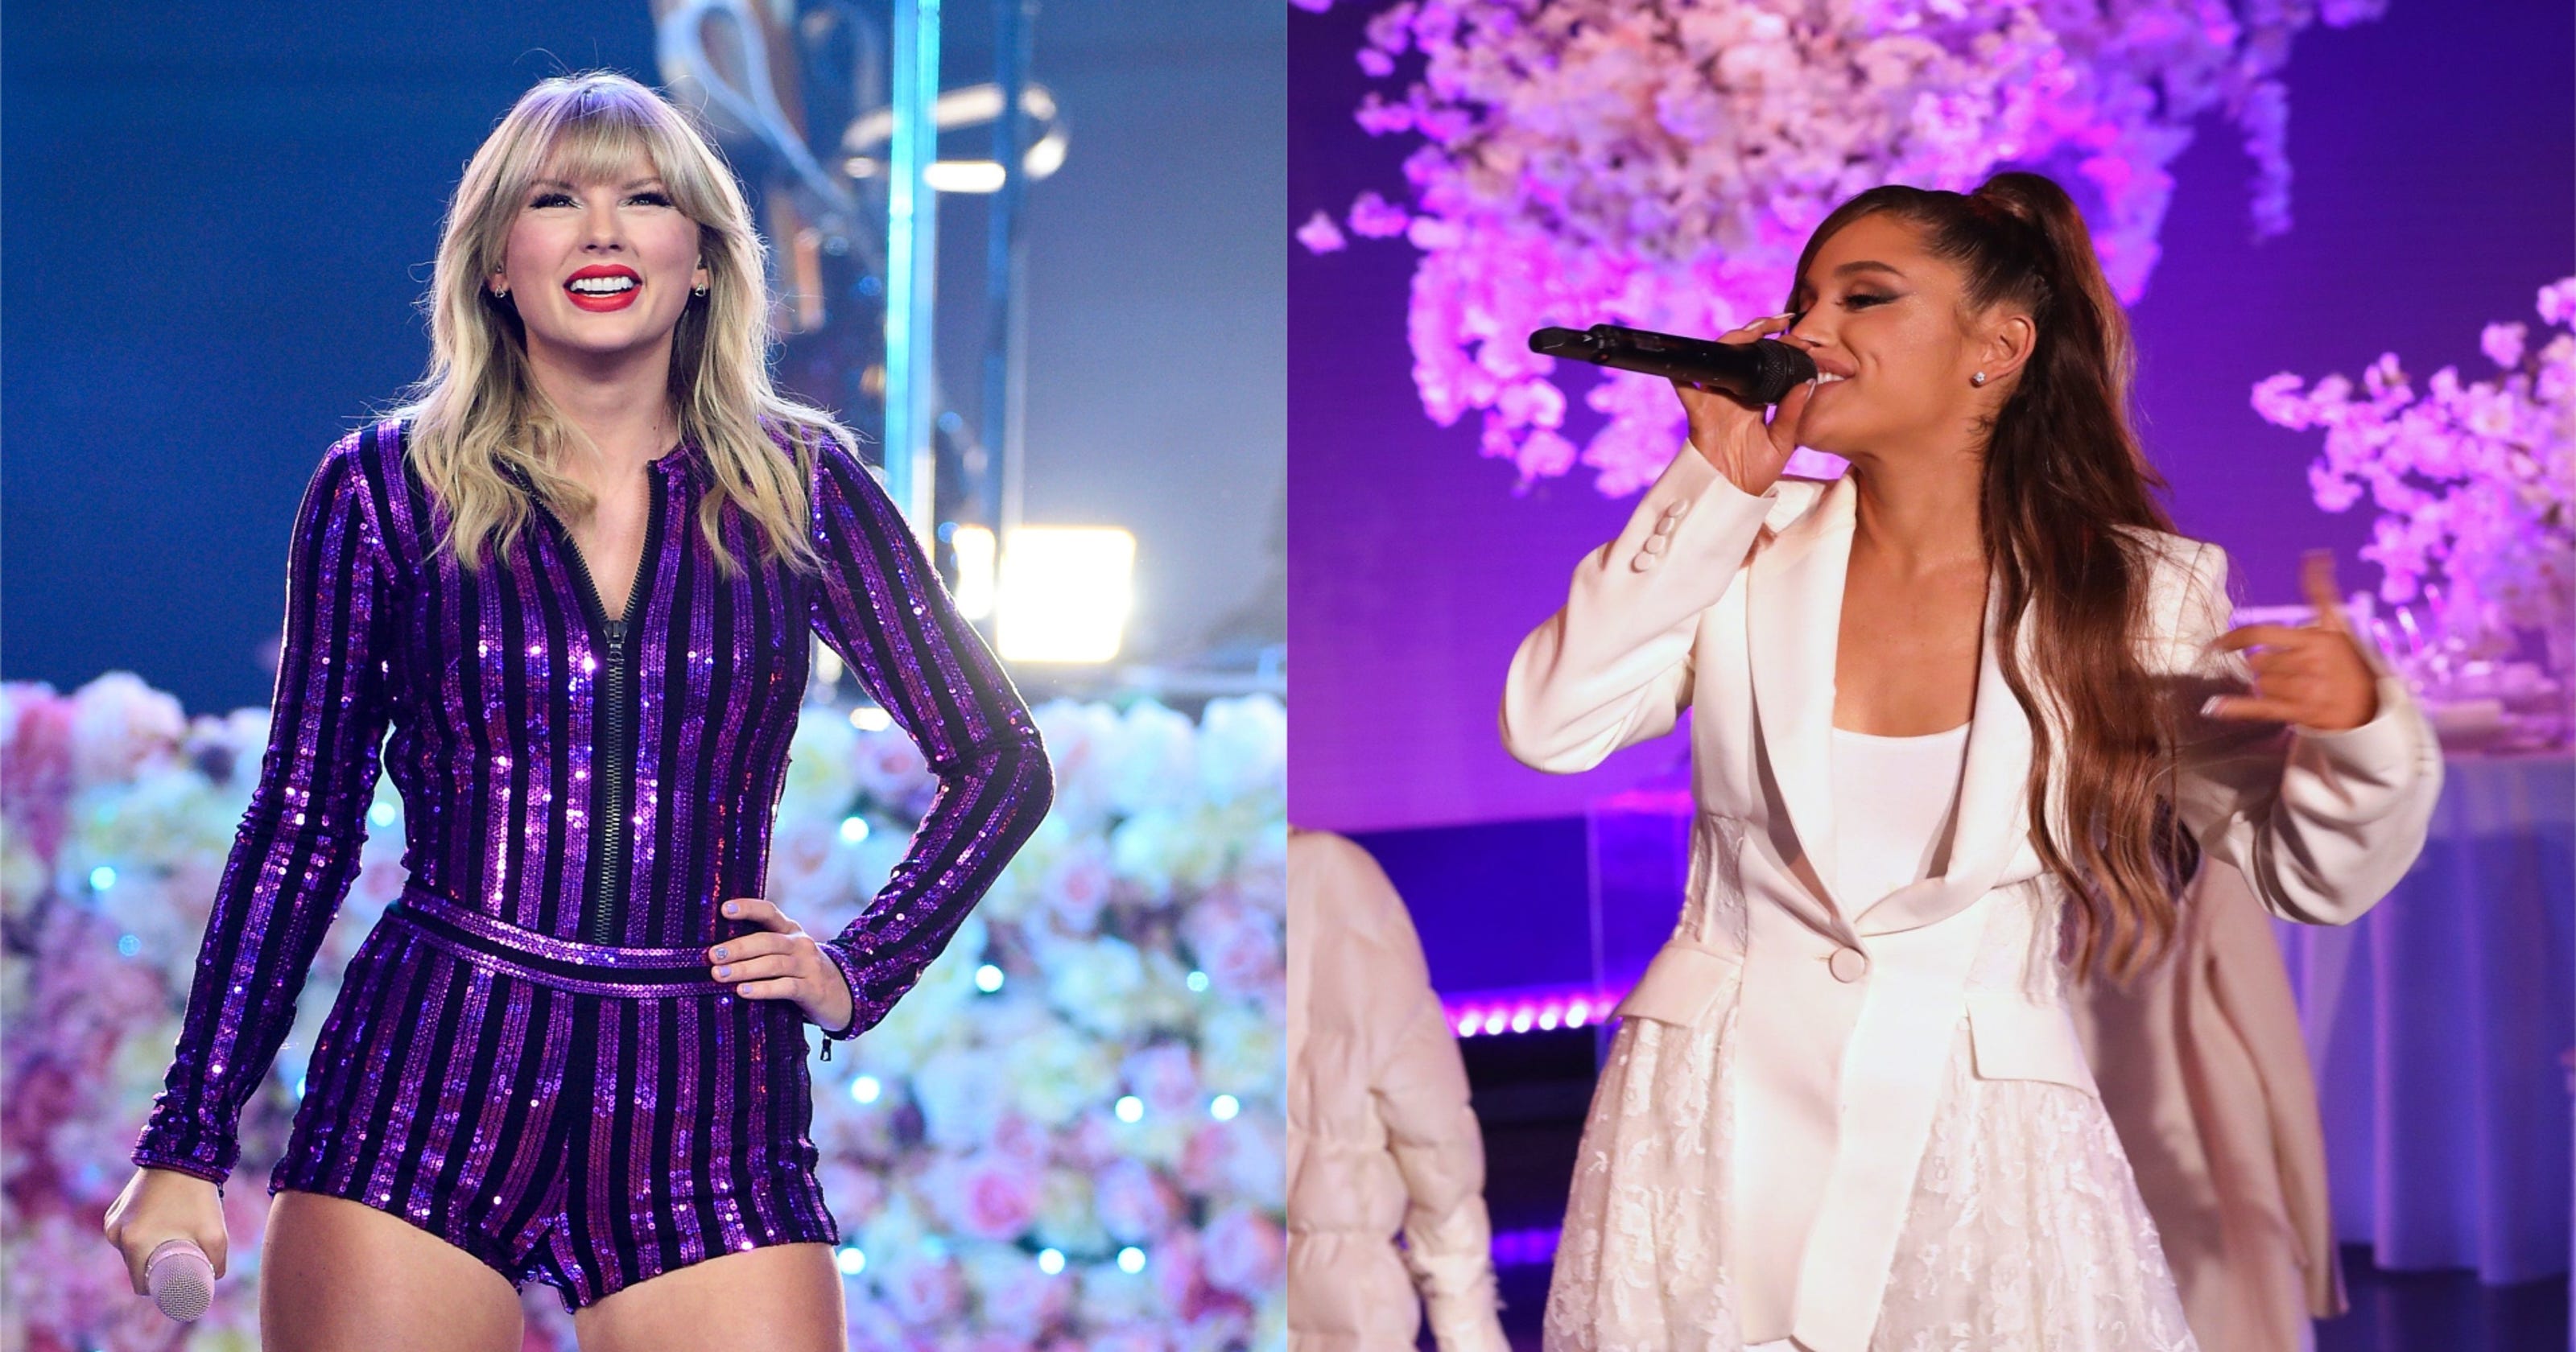 Taylor Swift, Ariana Grande lead MTV VMA nominations with 10 each